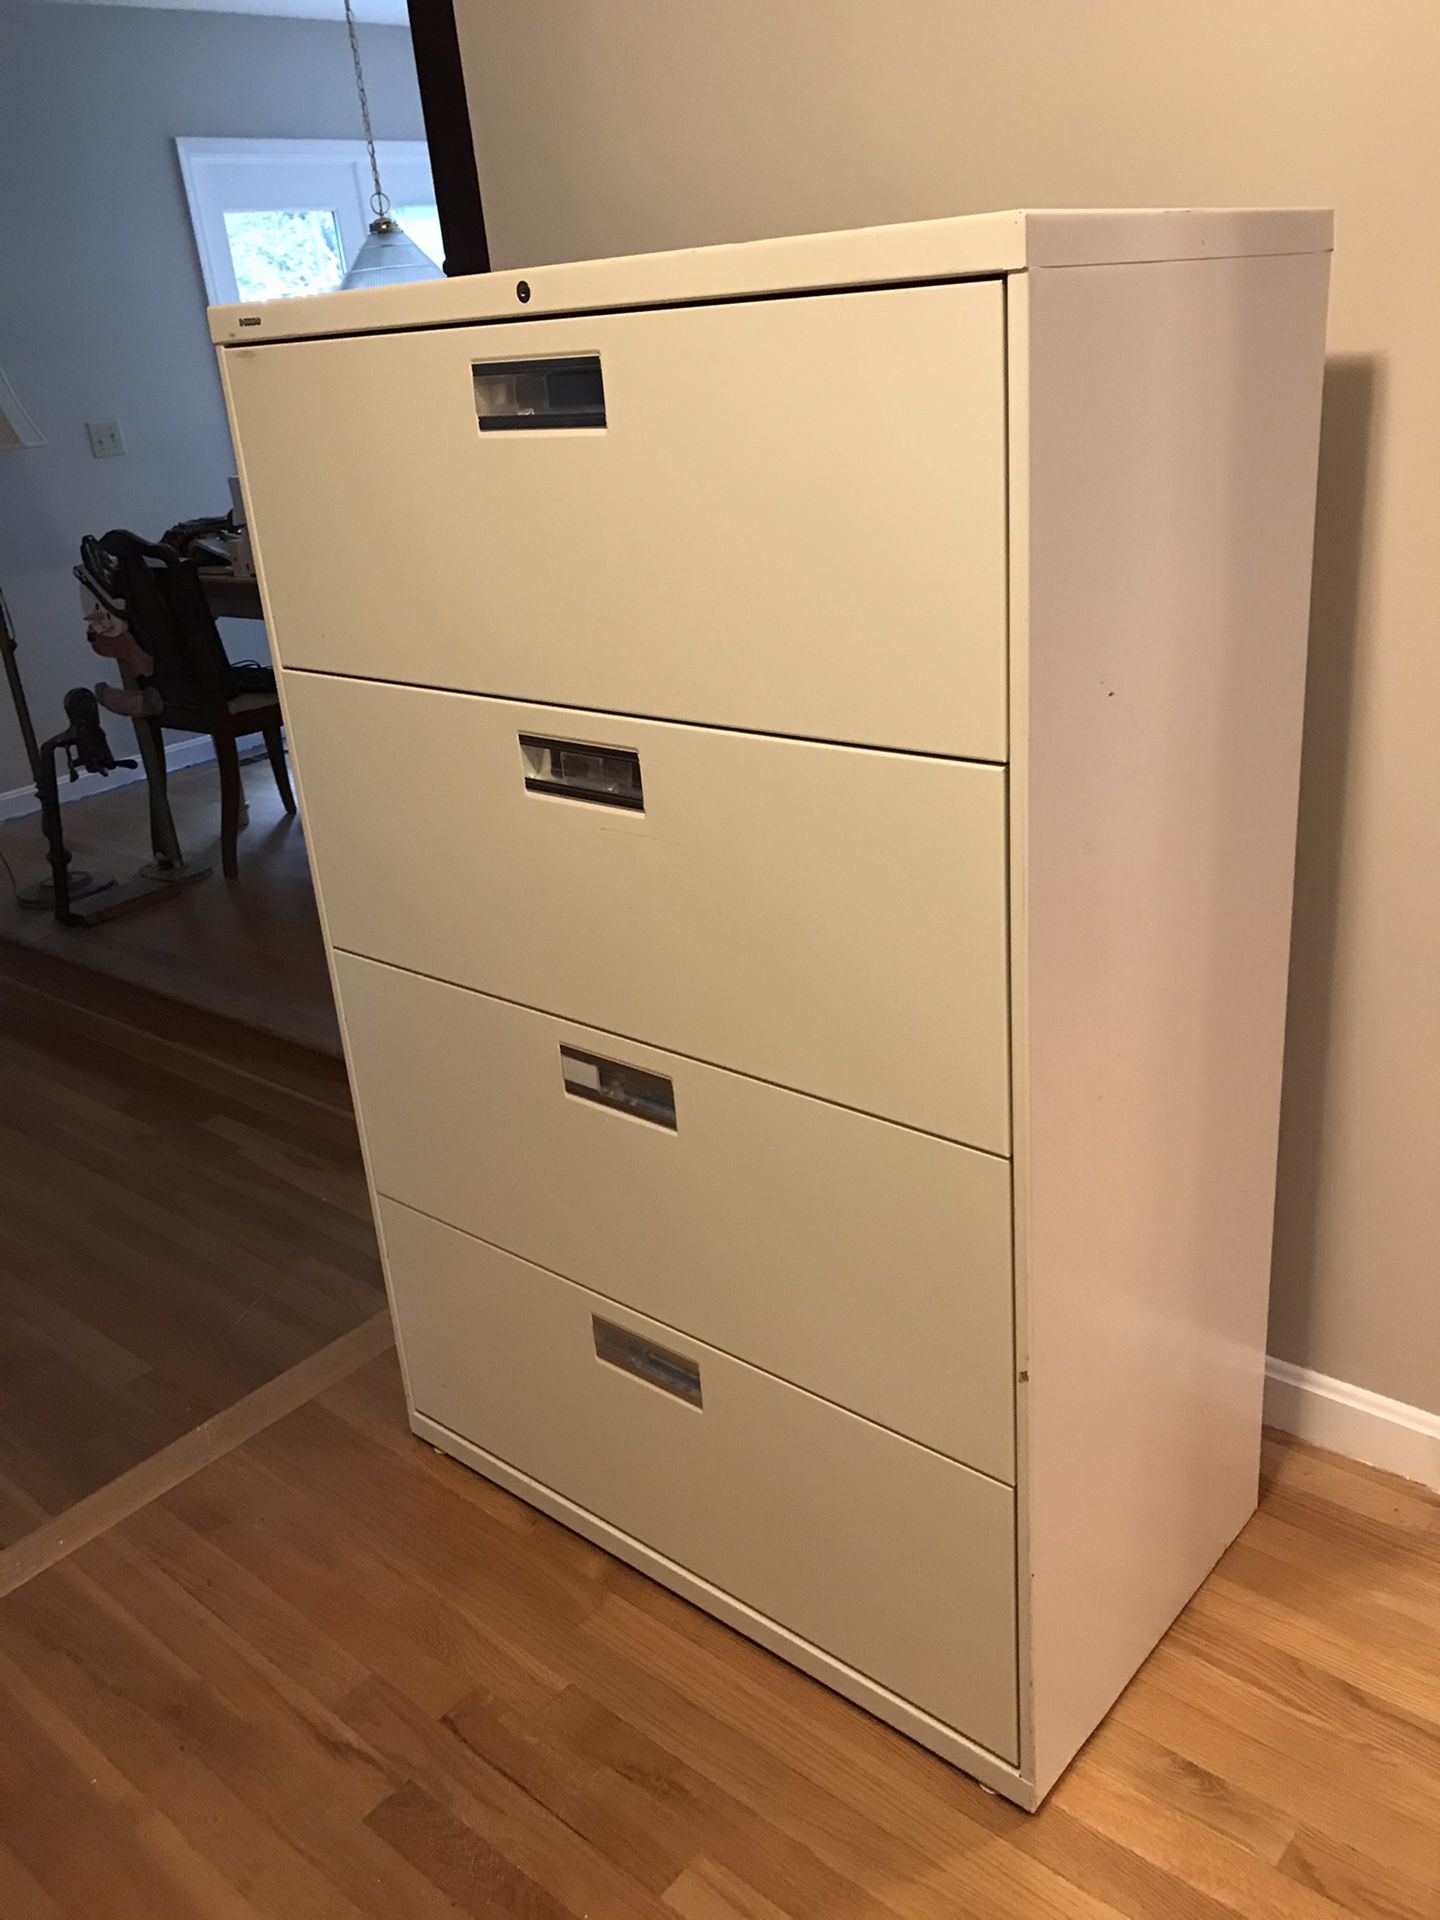 Four drawer lateral file cabinet 36x53x20 deep. Used. Two units, One has key and can be locked.